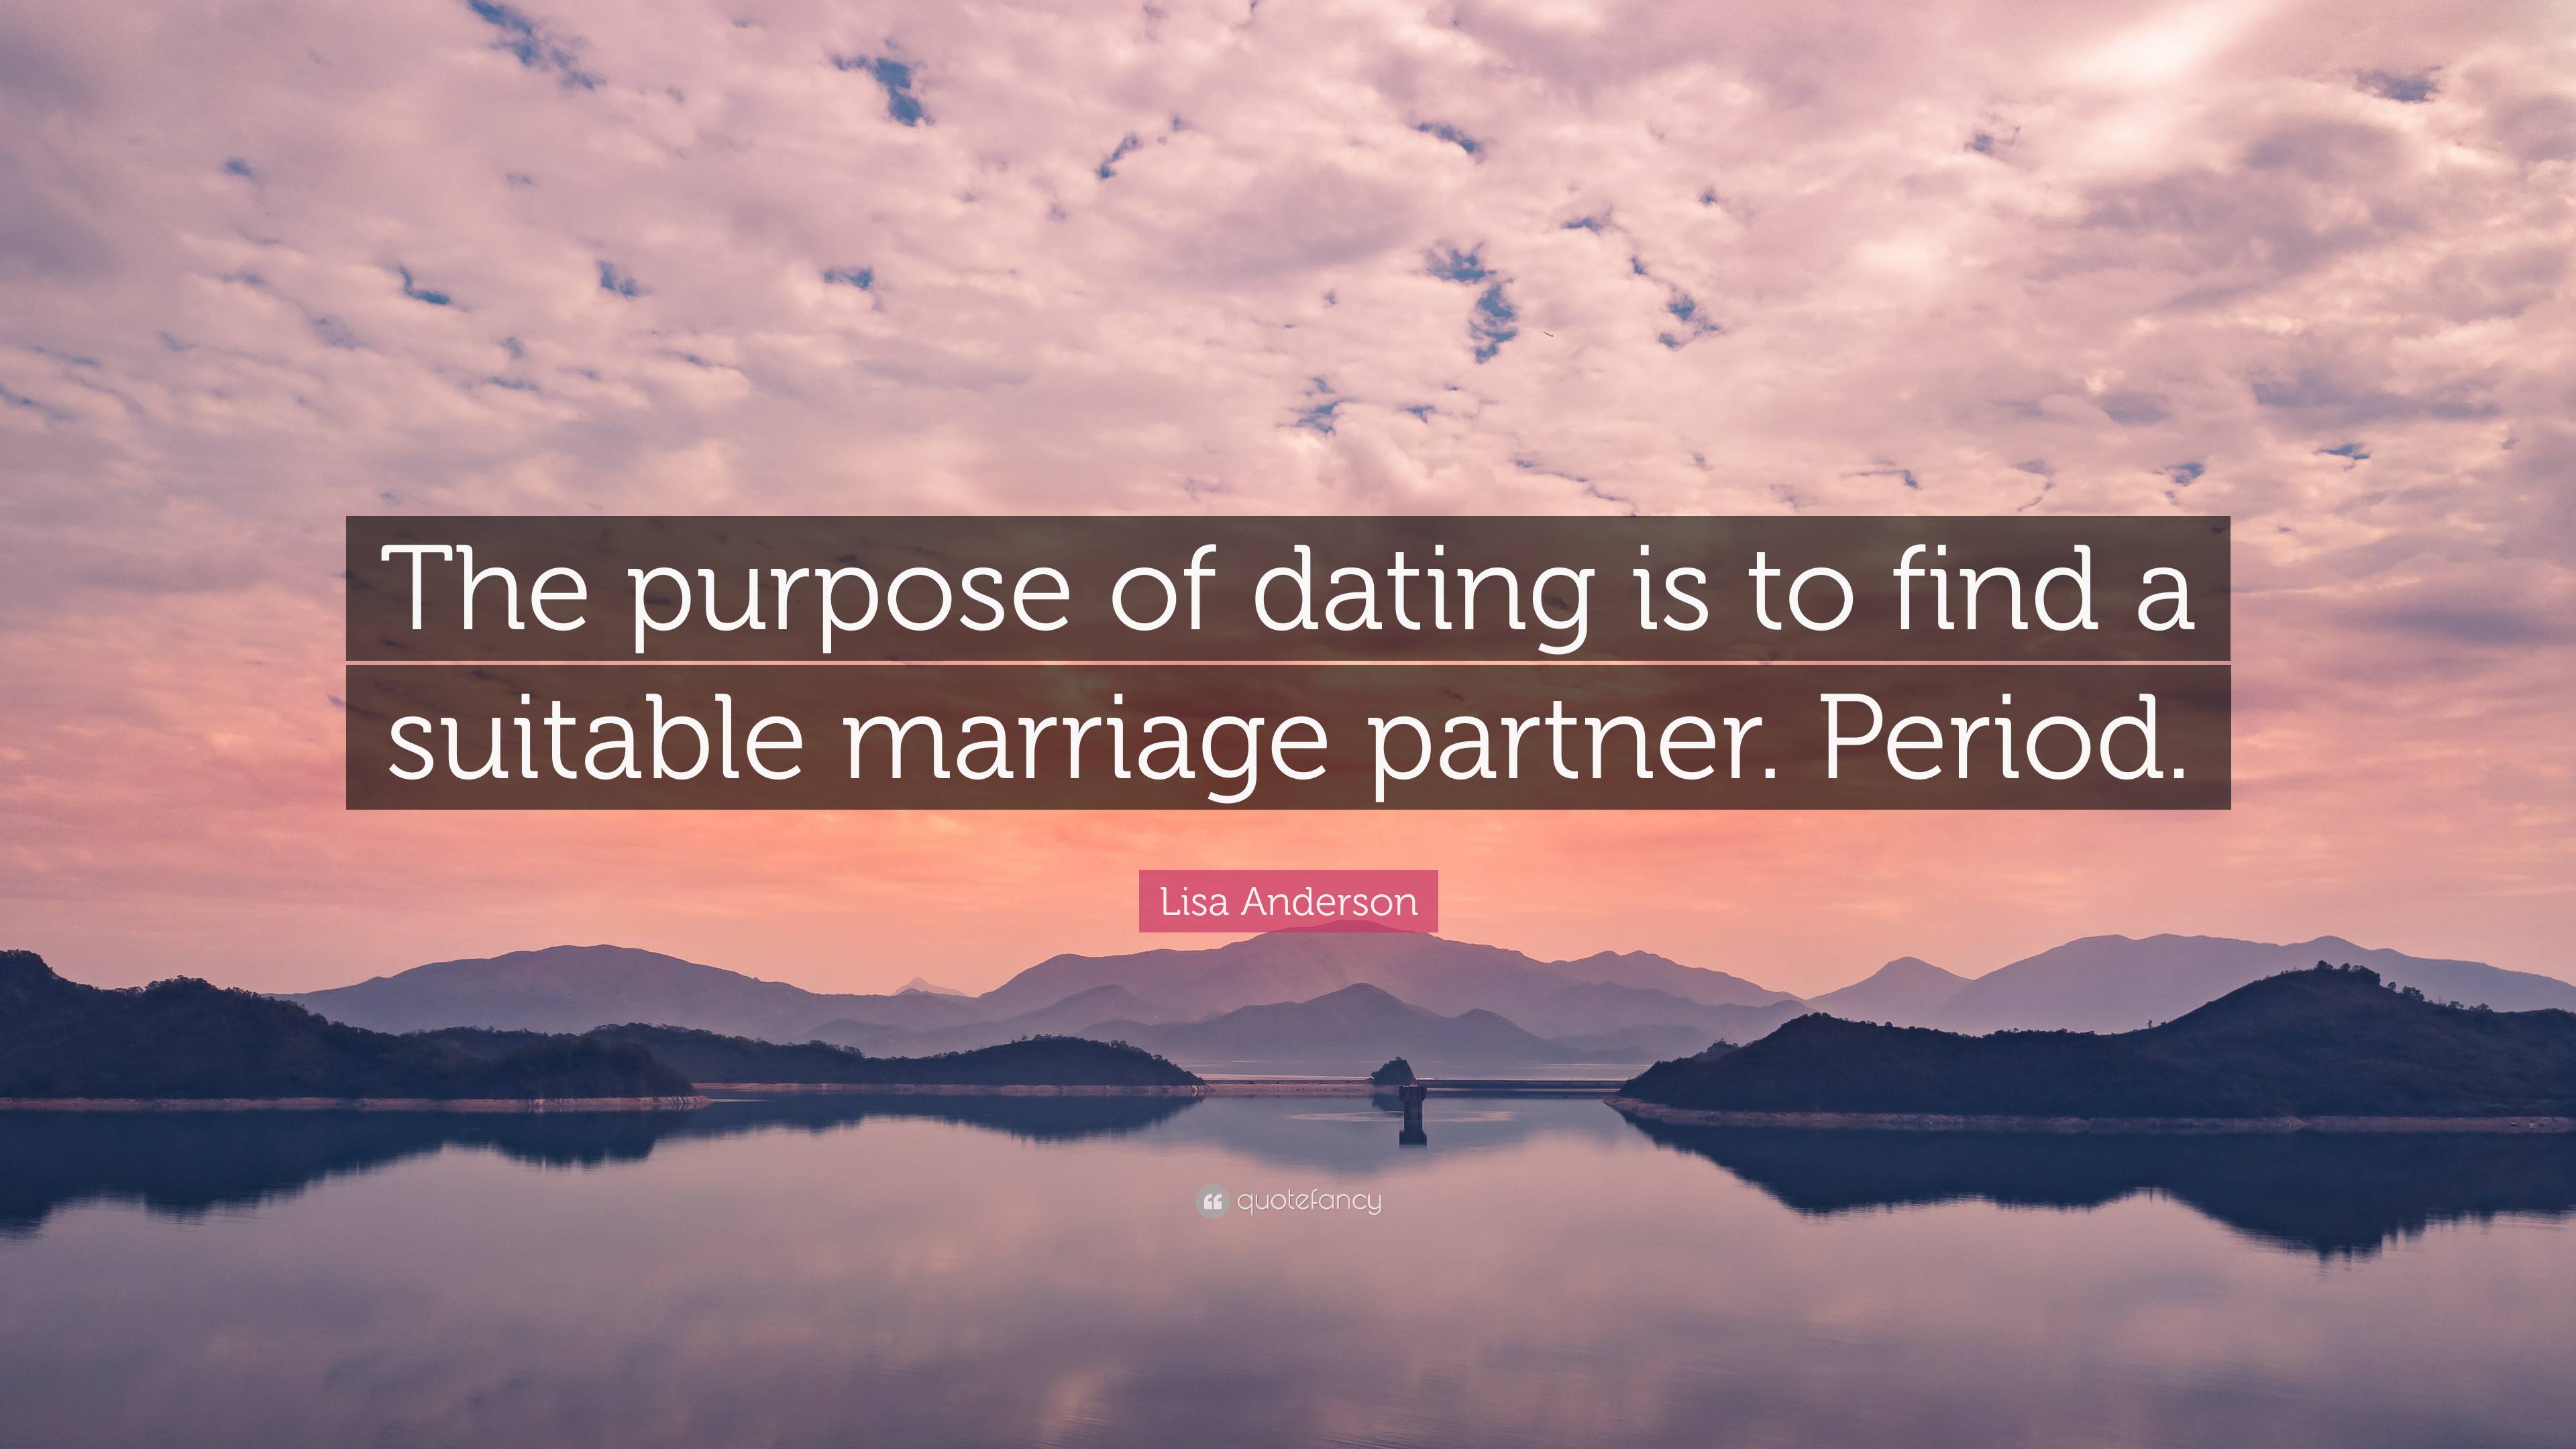 what is the main purpose of dating